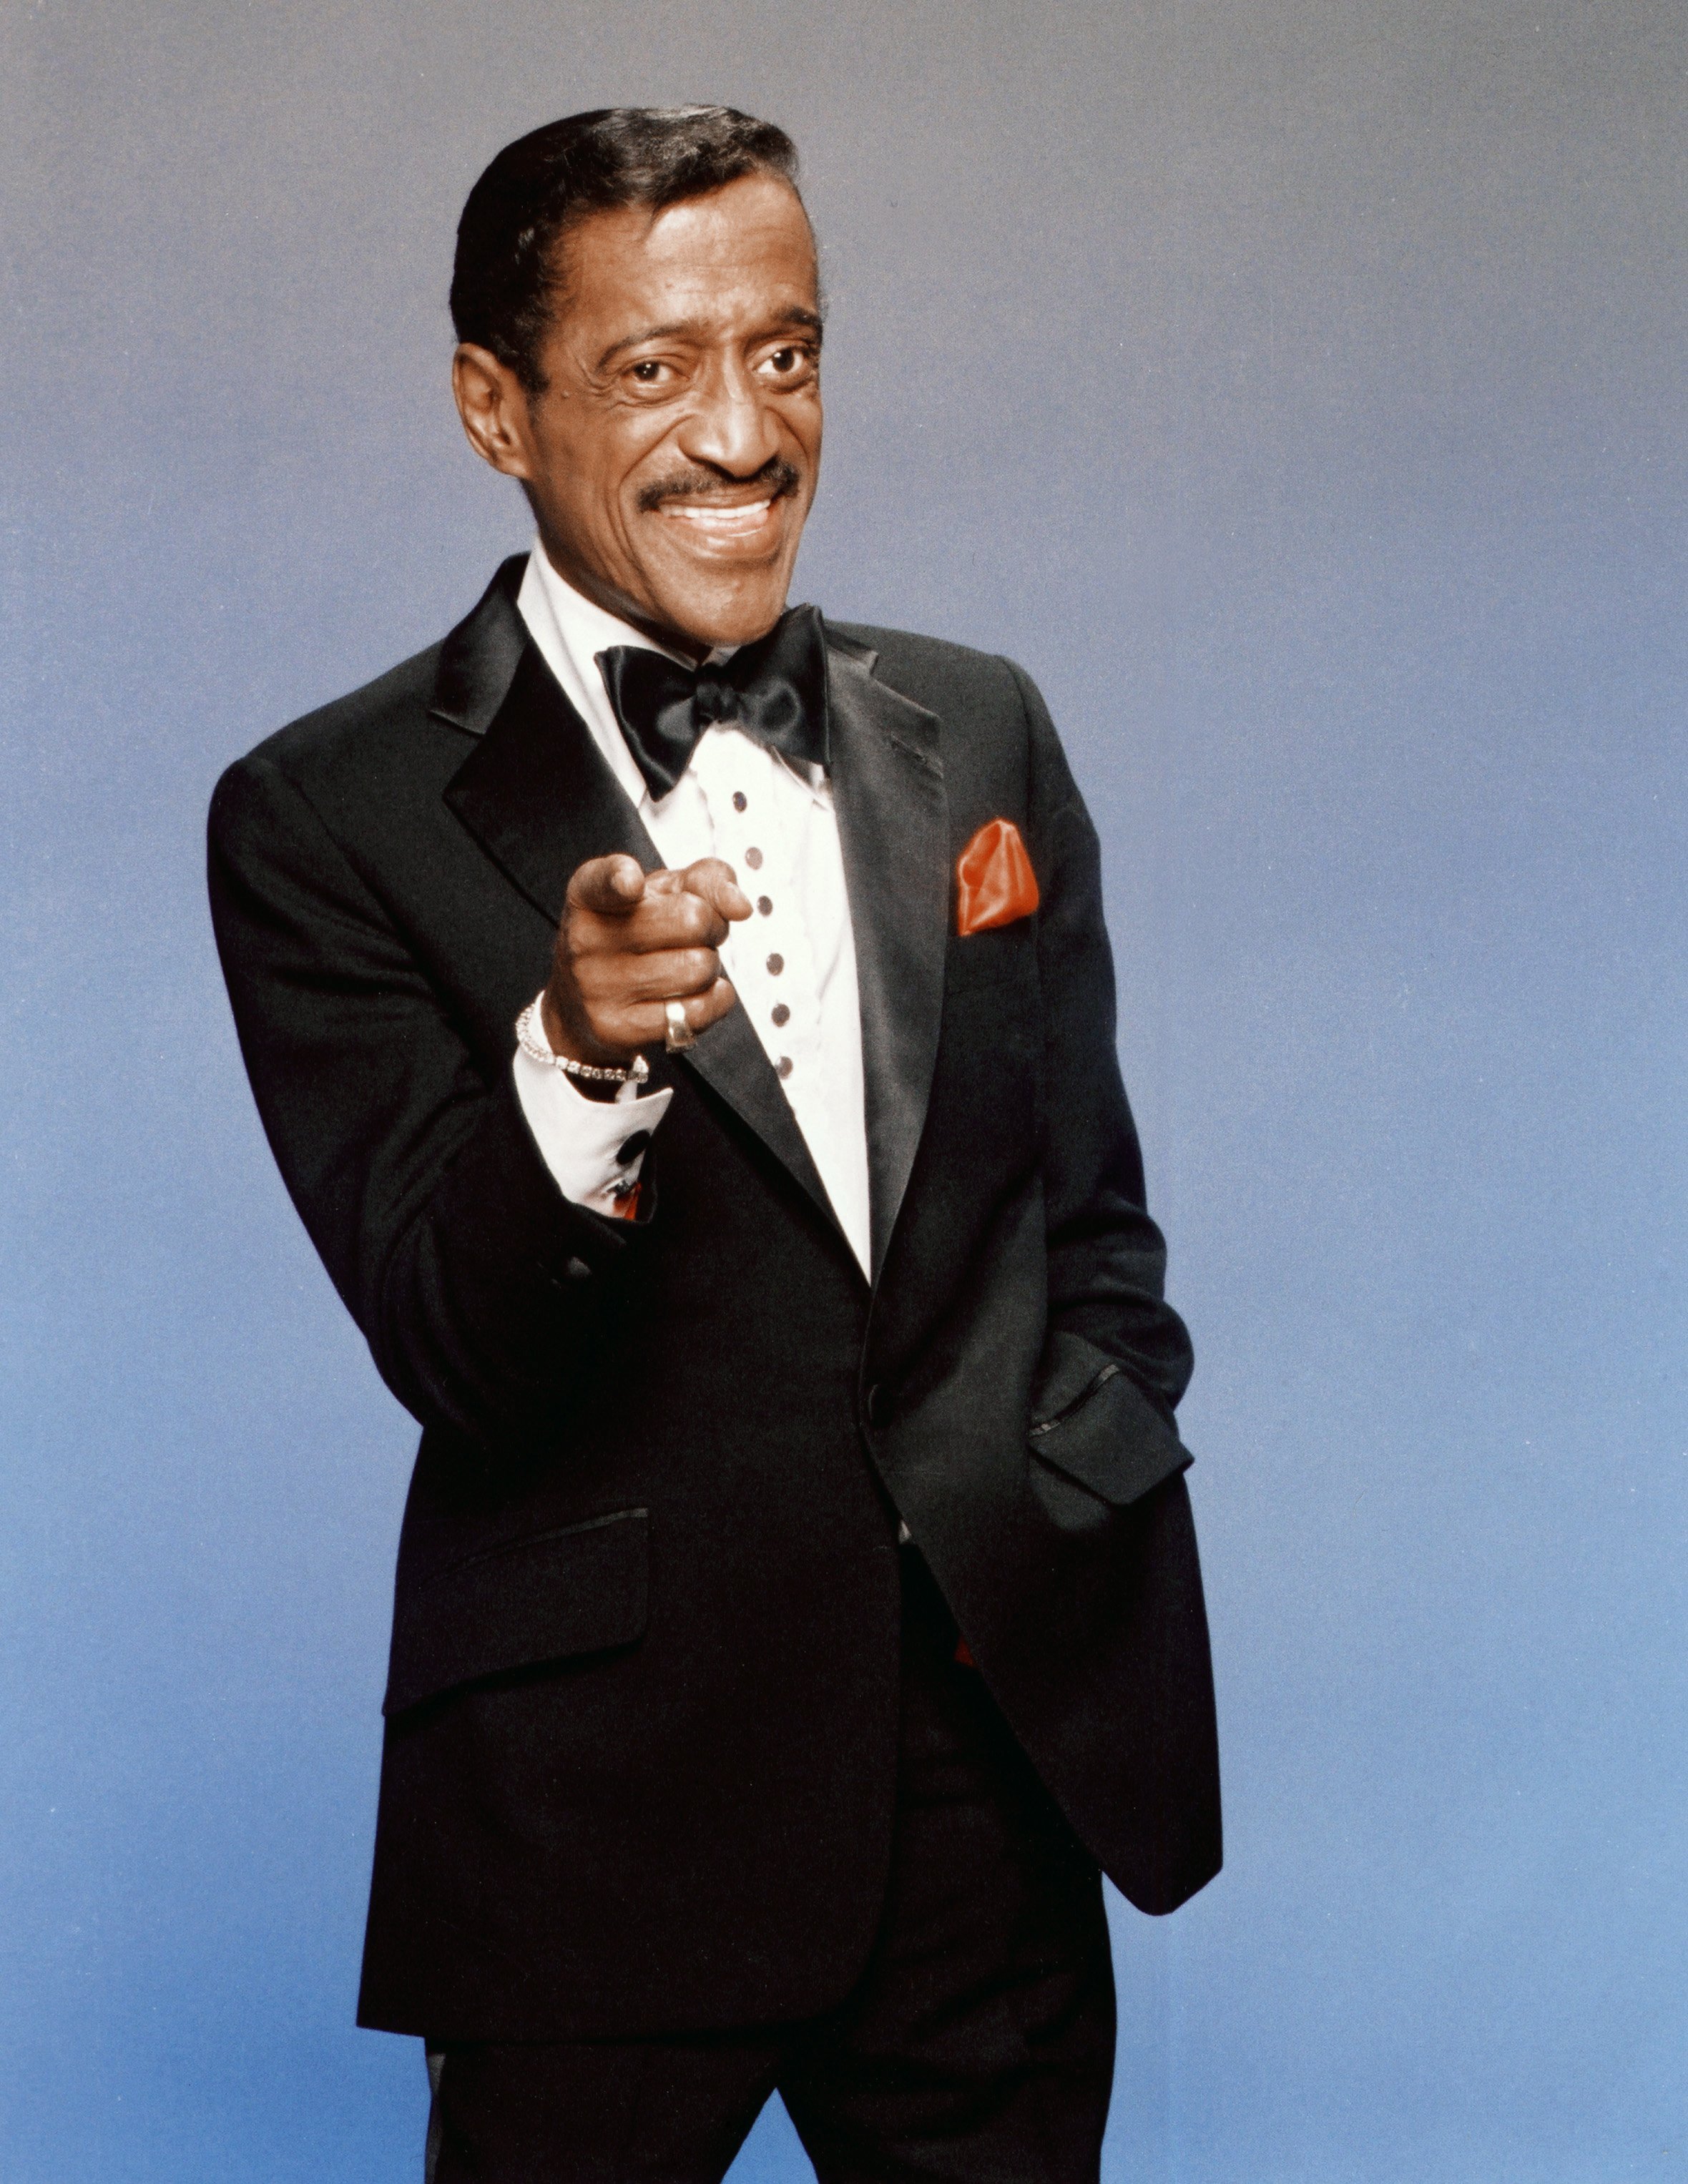 Actor Sammy Davis Jr. poses for a portrait in 1988 in Los Angeles, California. | Source: Getty Images